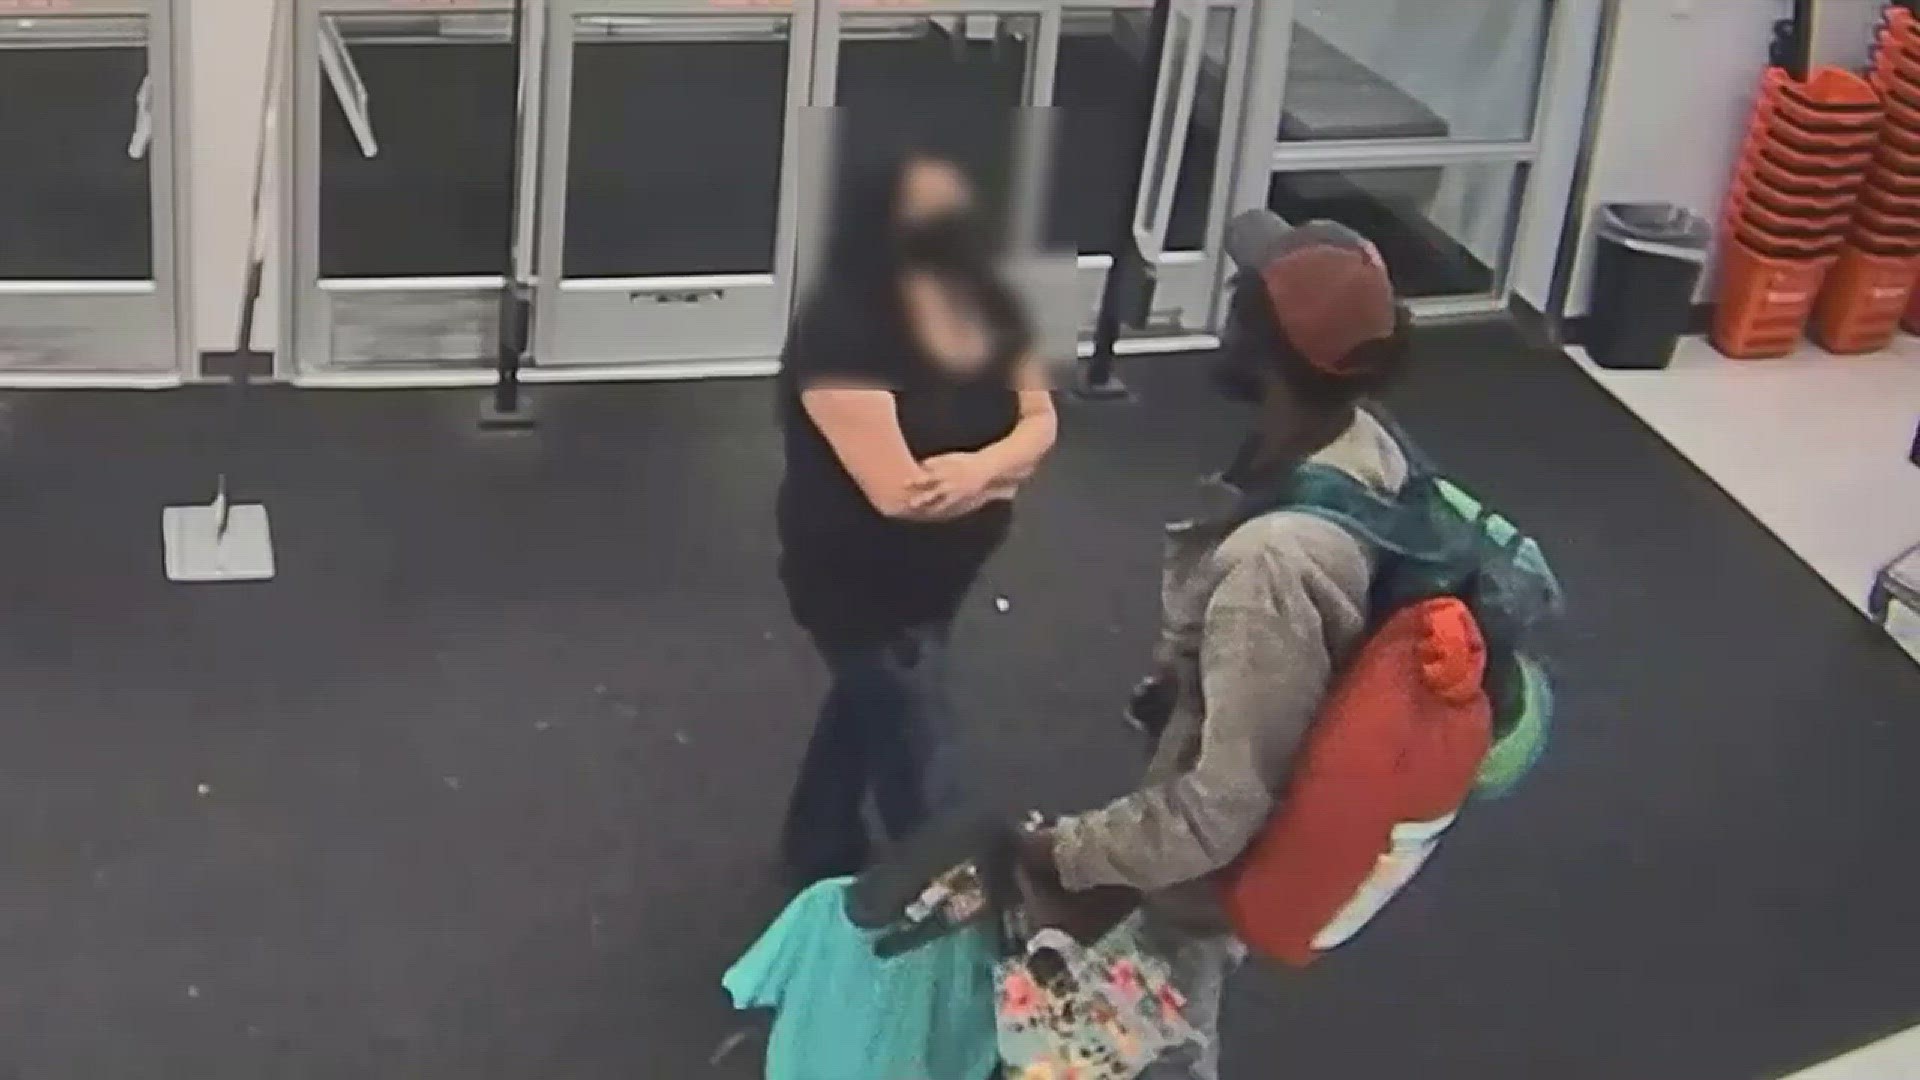 Two women used shopping carts to try and prevent the guy from leaving. When one dropped her phone, he grabbed it, pushed her down and ran out the door.